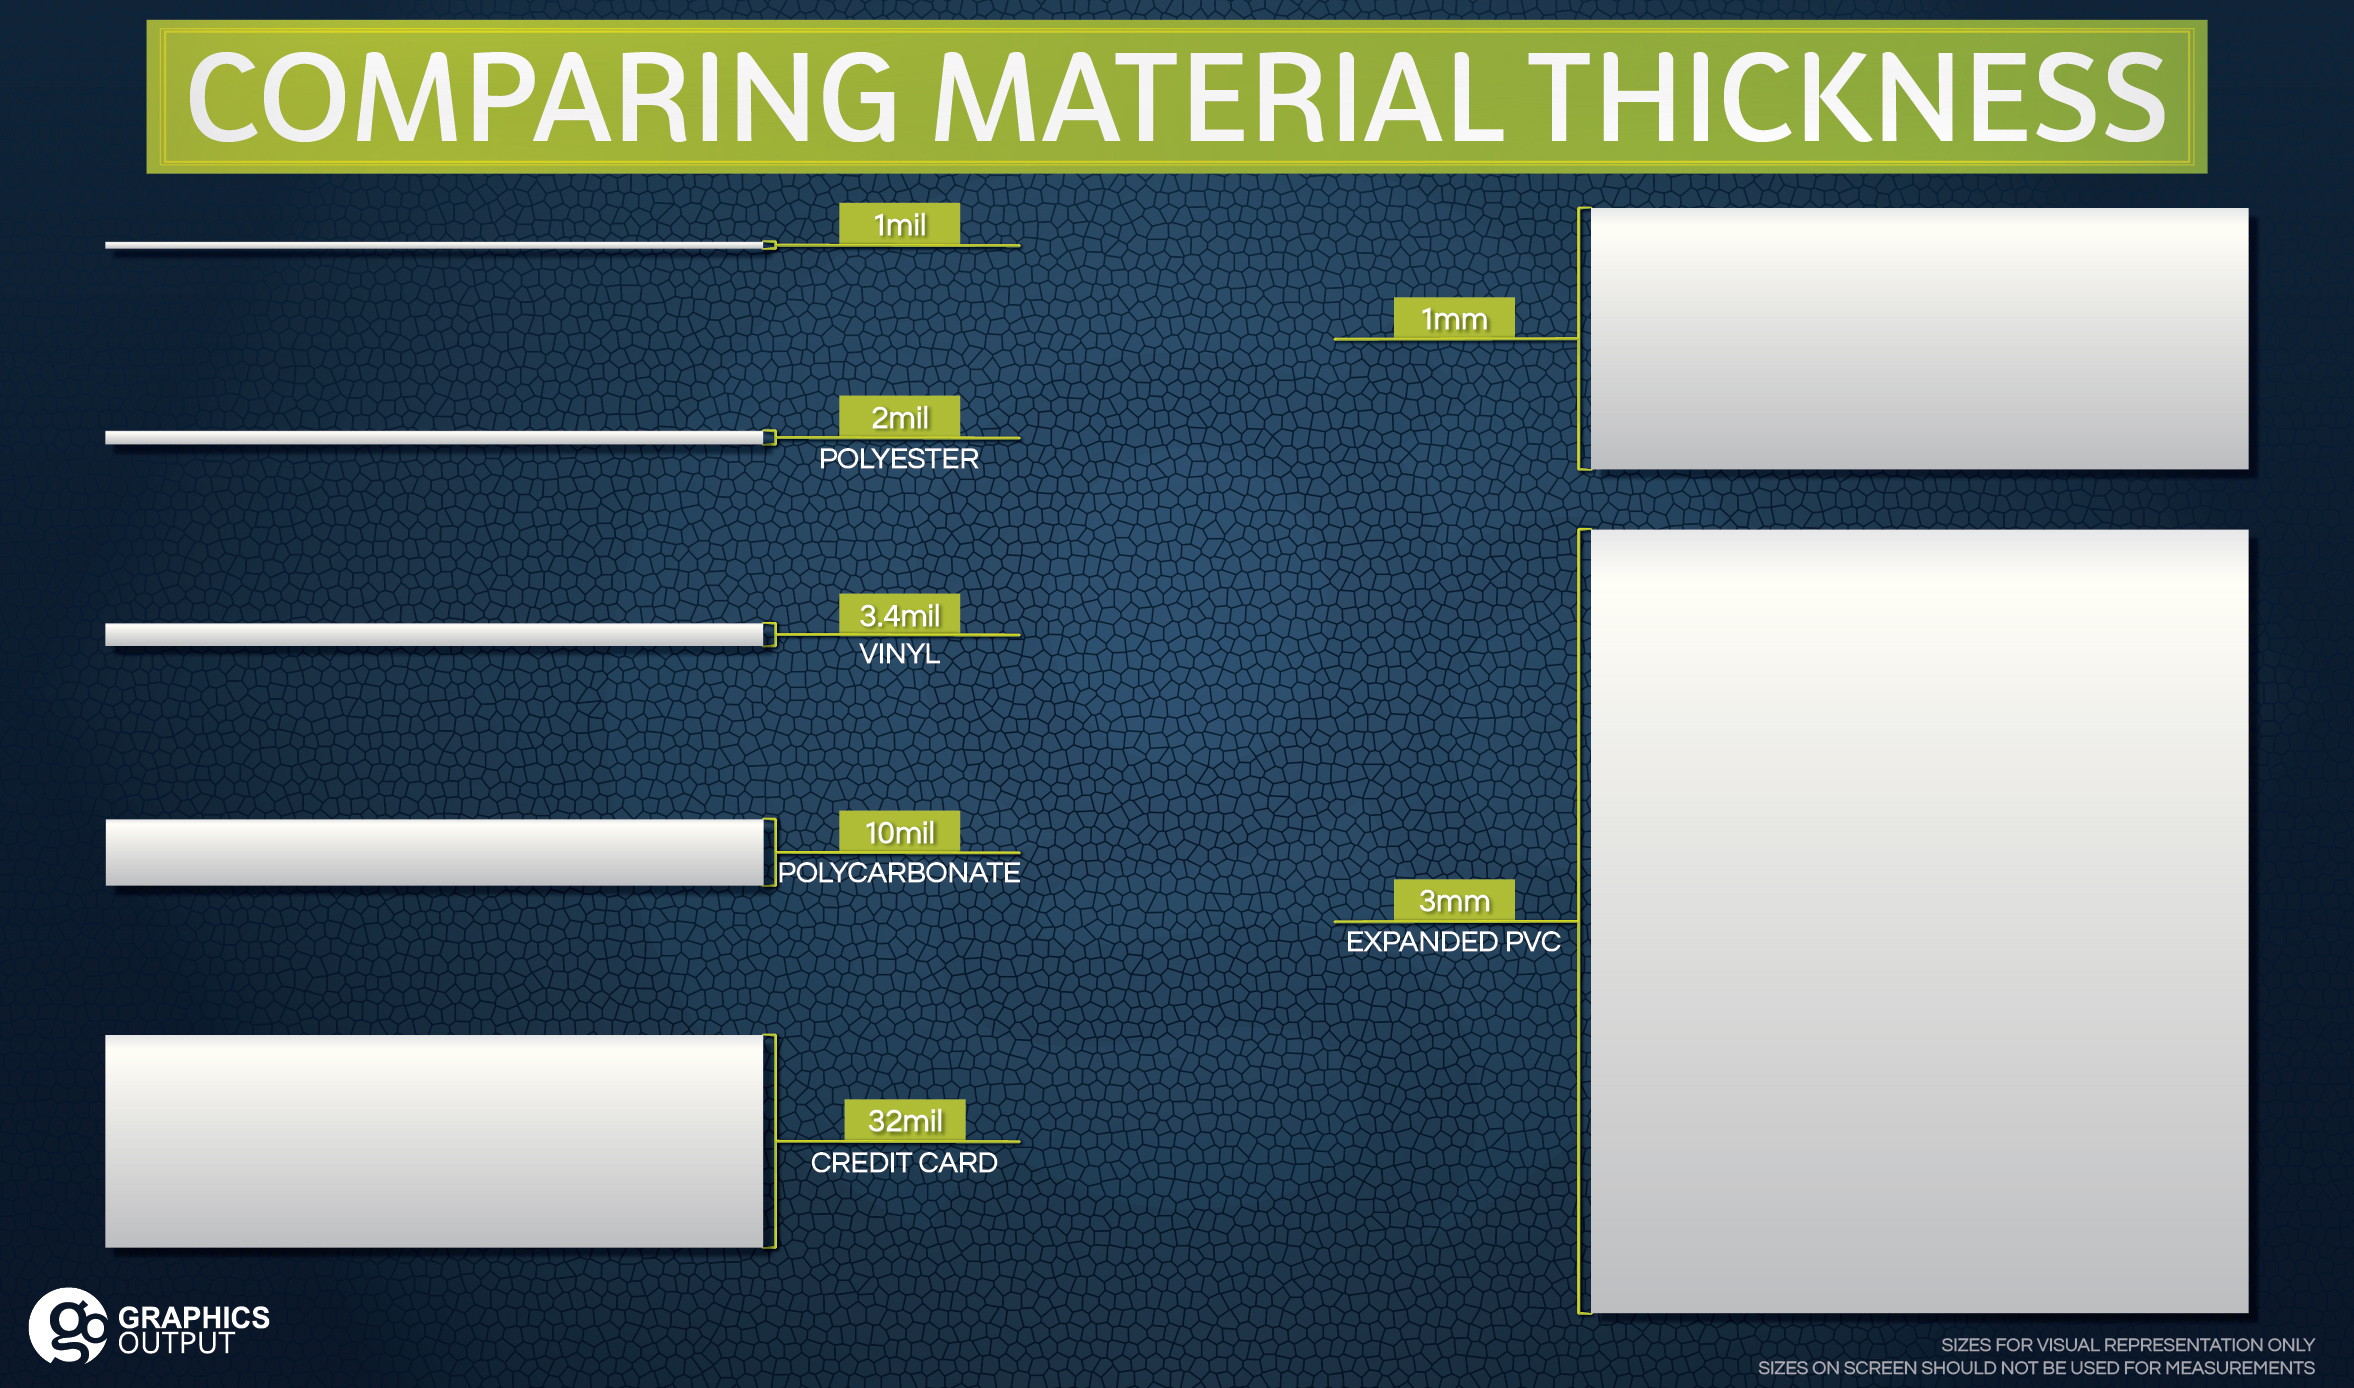 Comparison of common graphic material thicknesses, including mils vs millimeters.